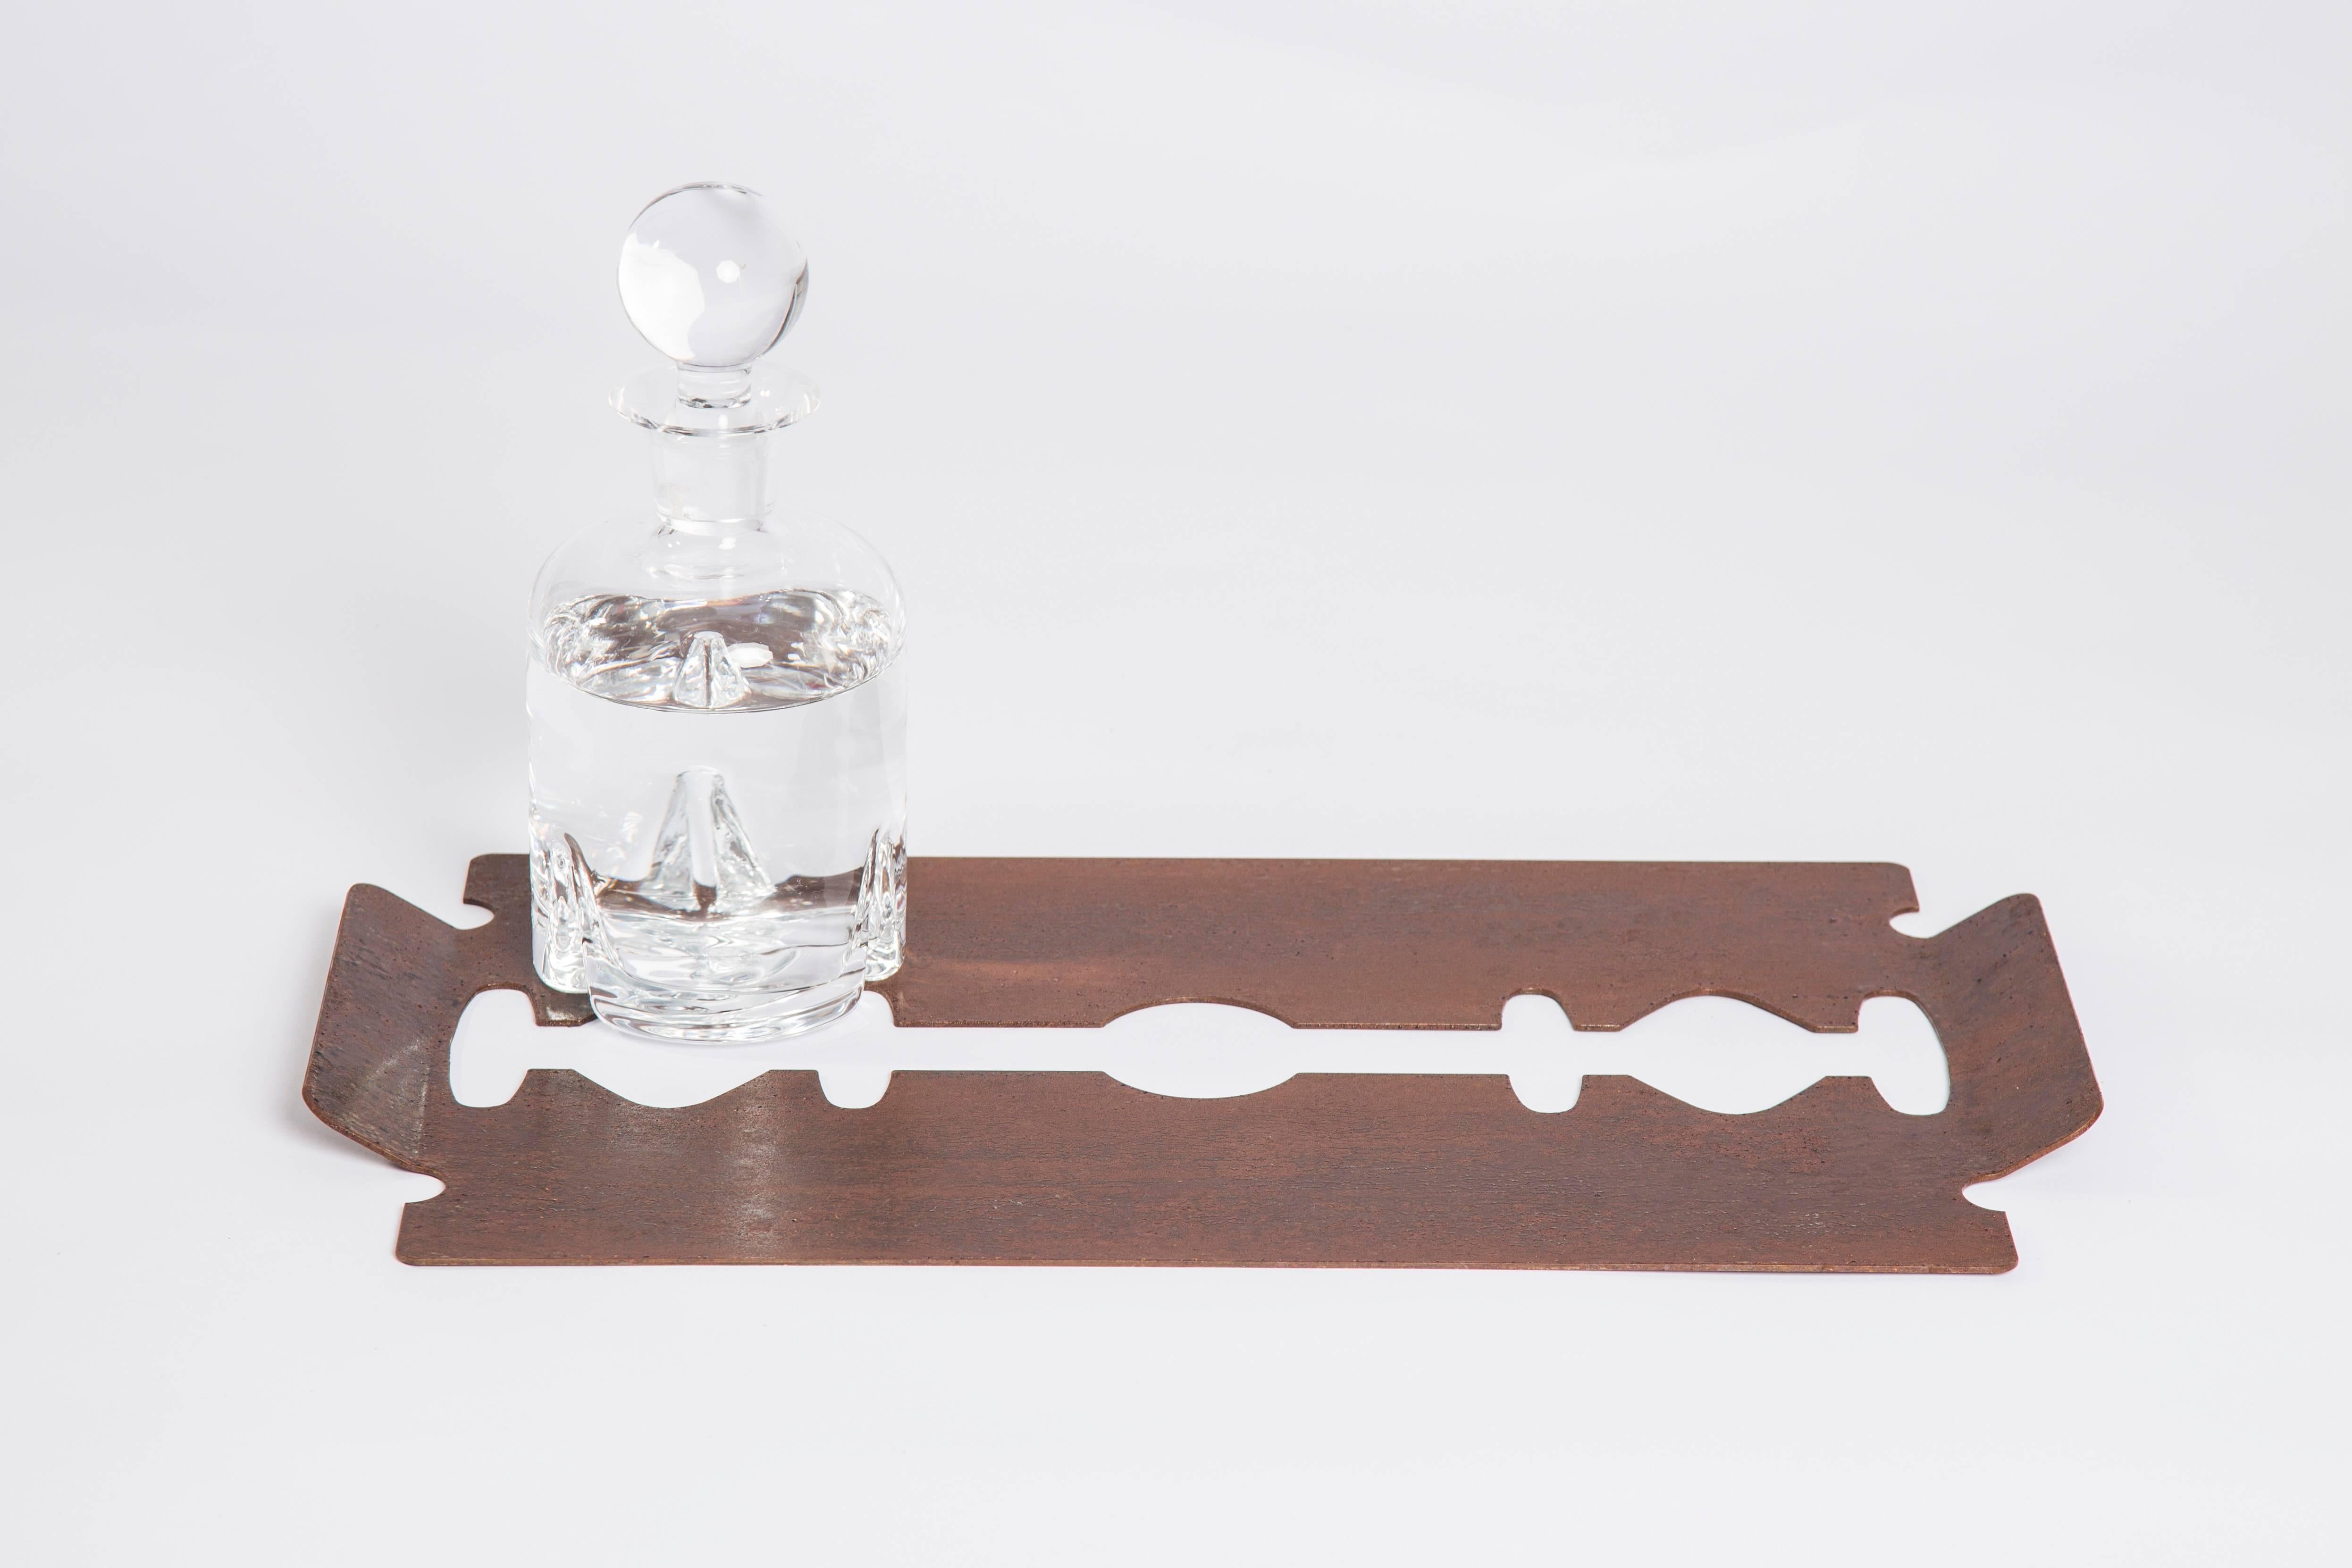 This cocktail tray with rust-colored plating is made to resemble the blade of a razor, a playful proposal of the designer. Topcoat in rusty plating, minimalist and modern style.